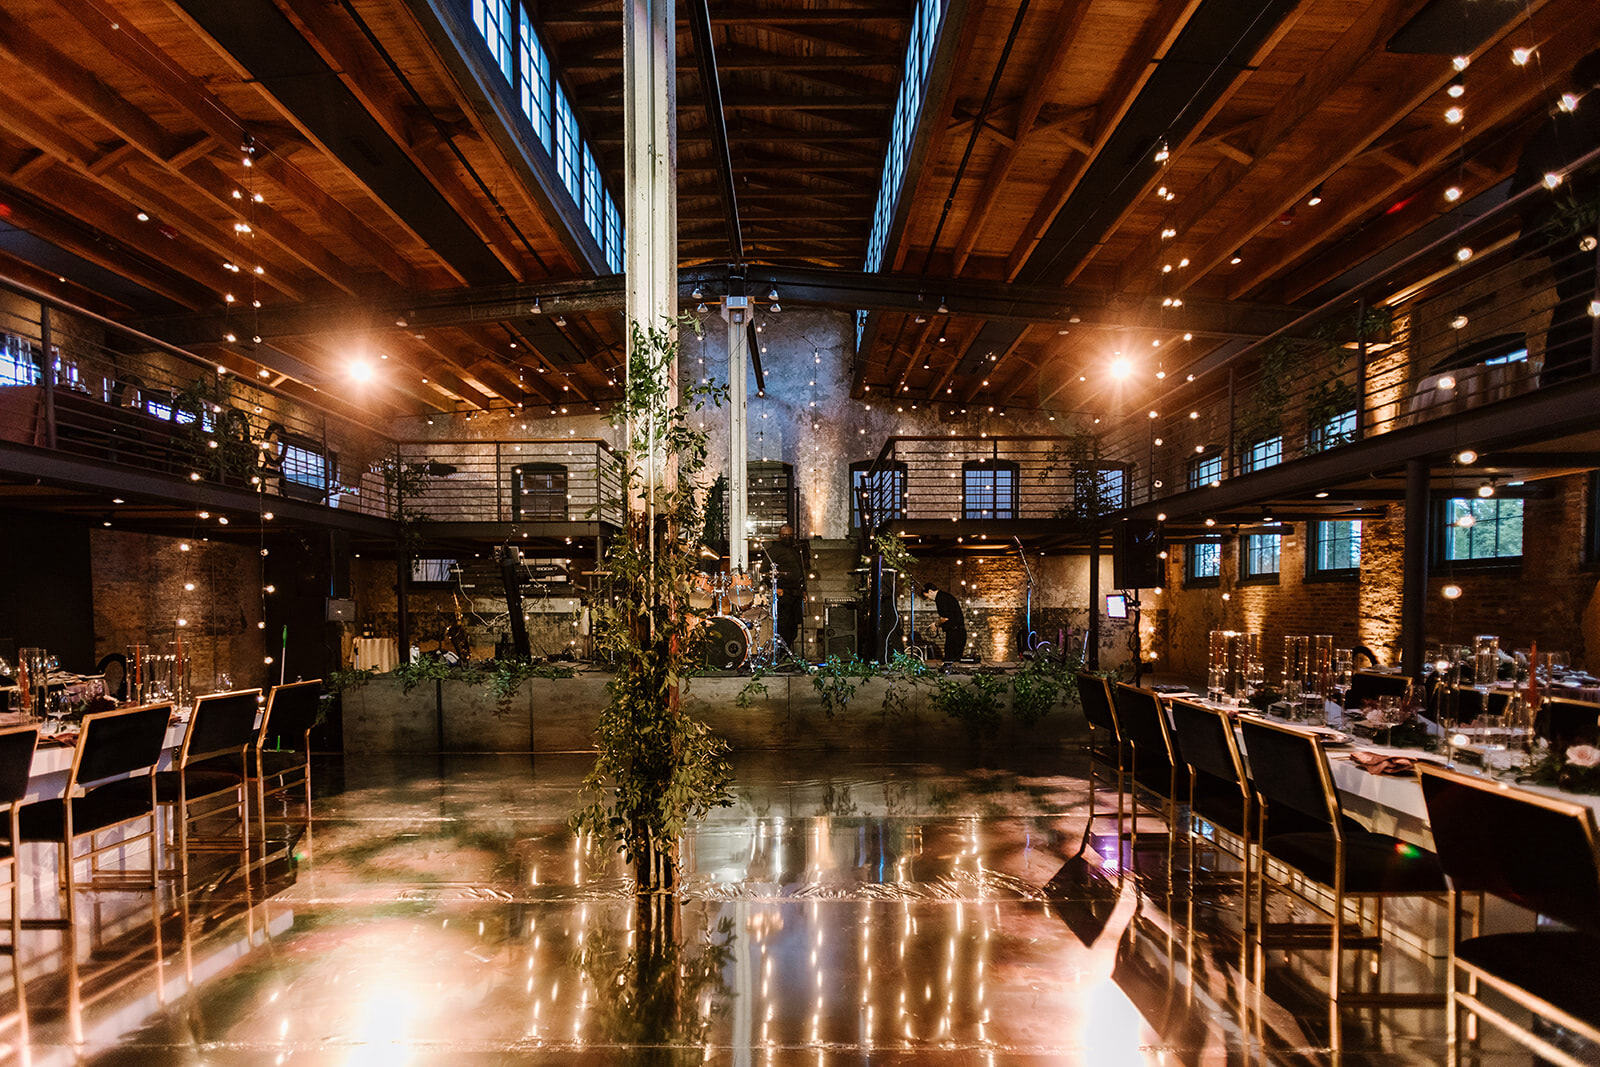 An industrial wedding venue in Baltimore, Maryland, set for an autumnal reception.